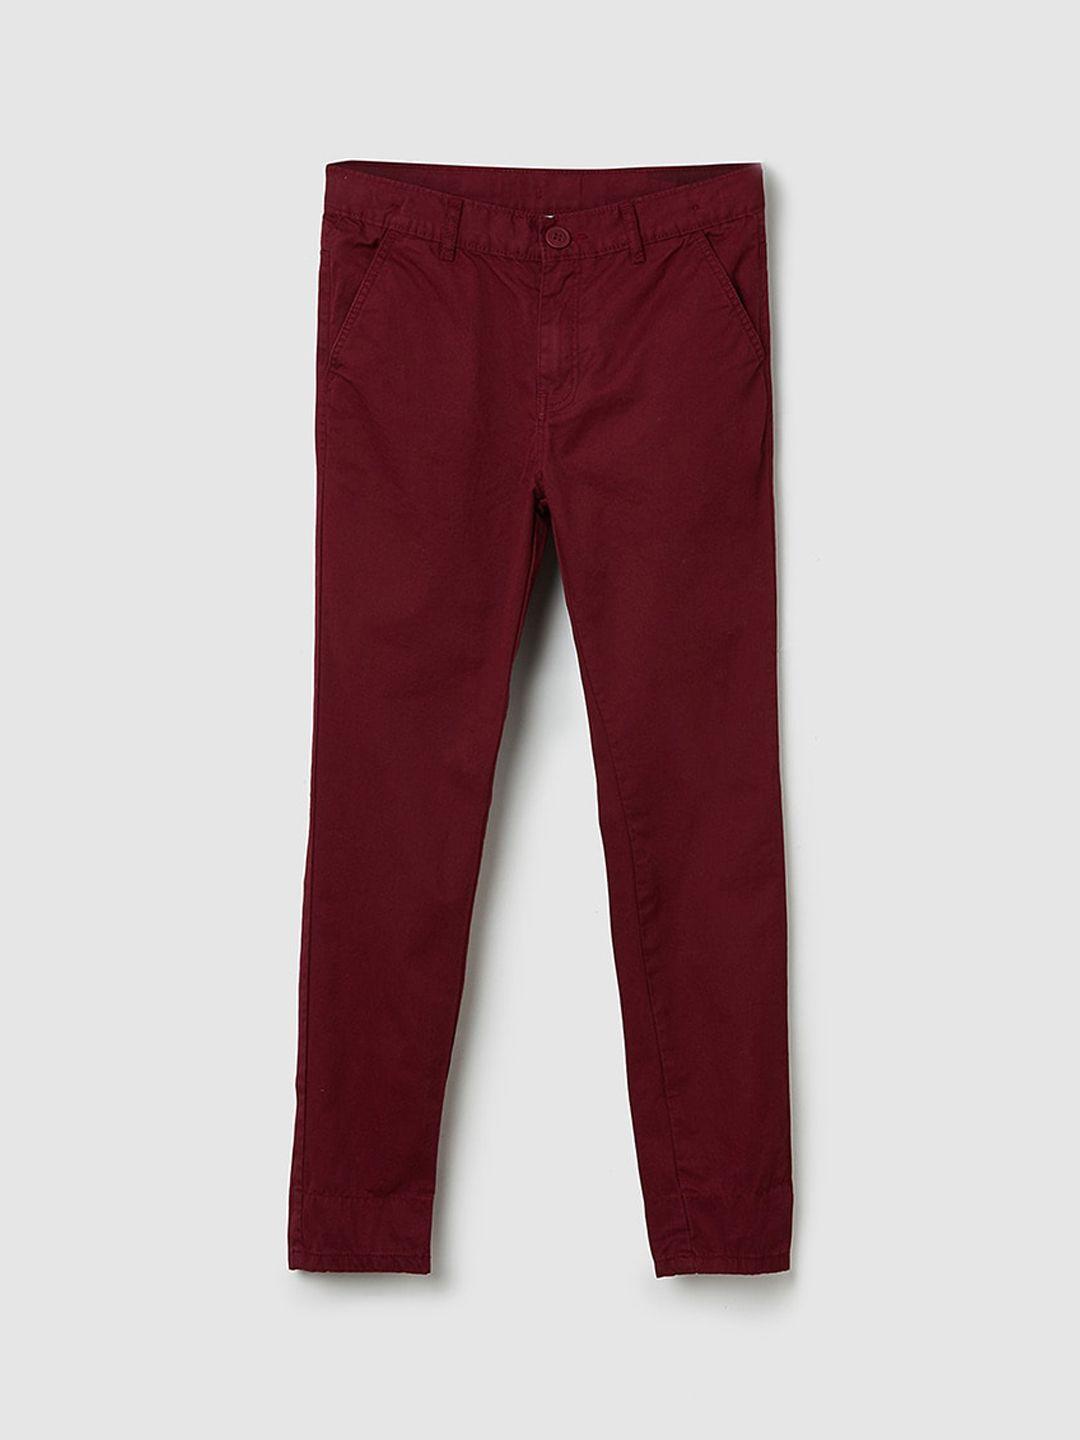 max boys rust trousers